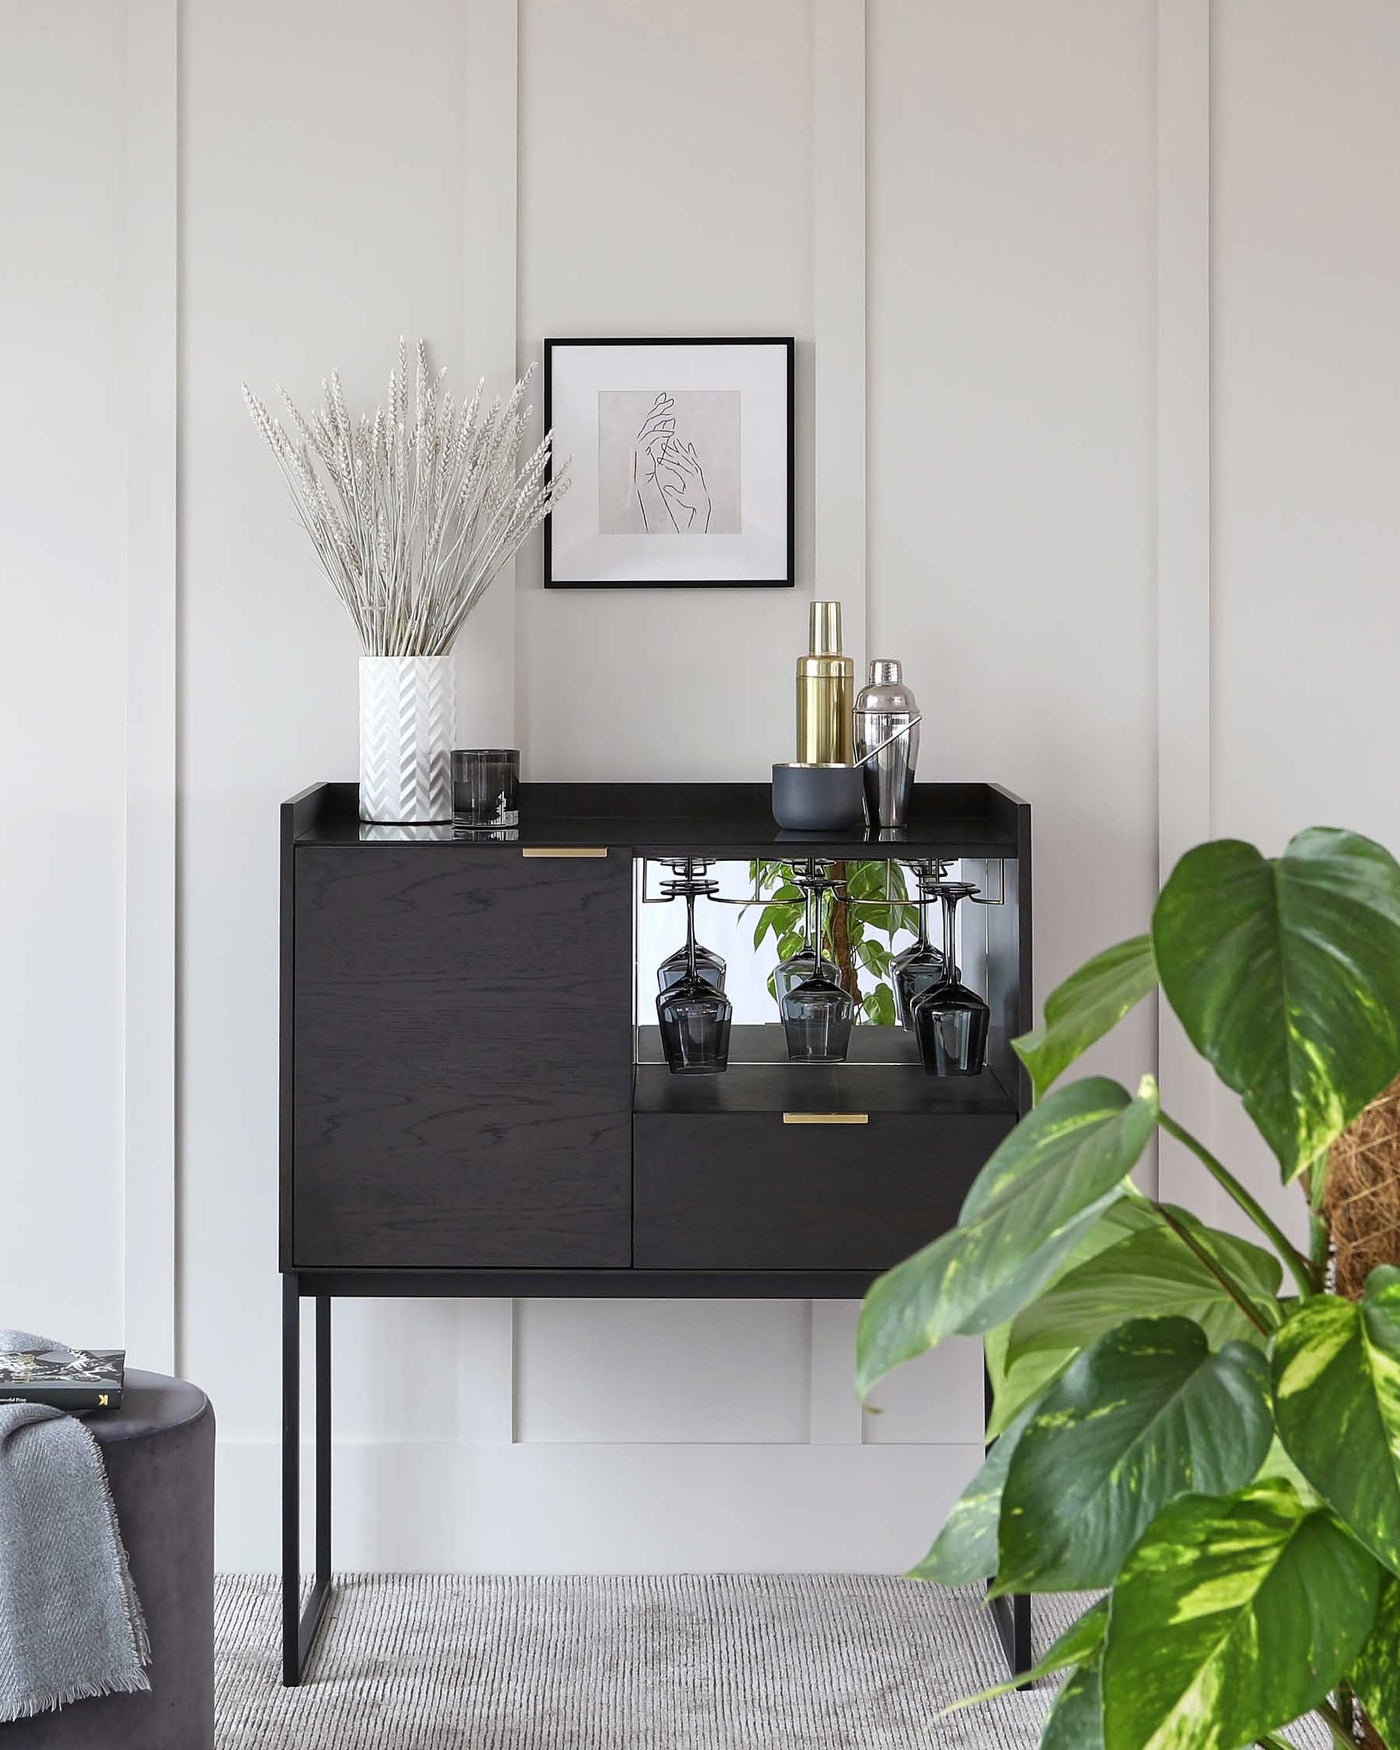 A modern black sideboard with brass handles and slender metal legs, featuring two cabinet doors and a shelf with glass panelling, displaying decorative items and houseplants.